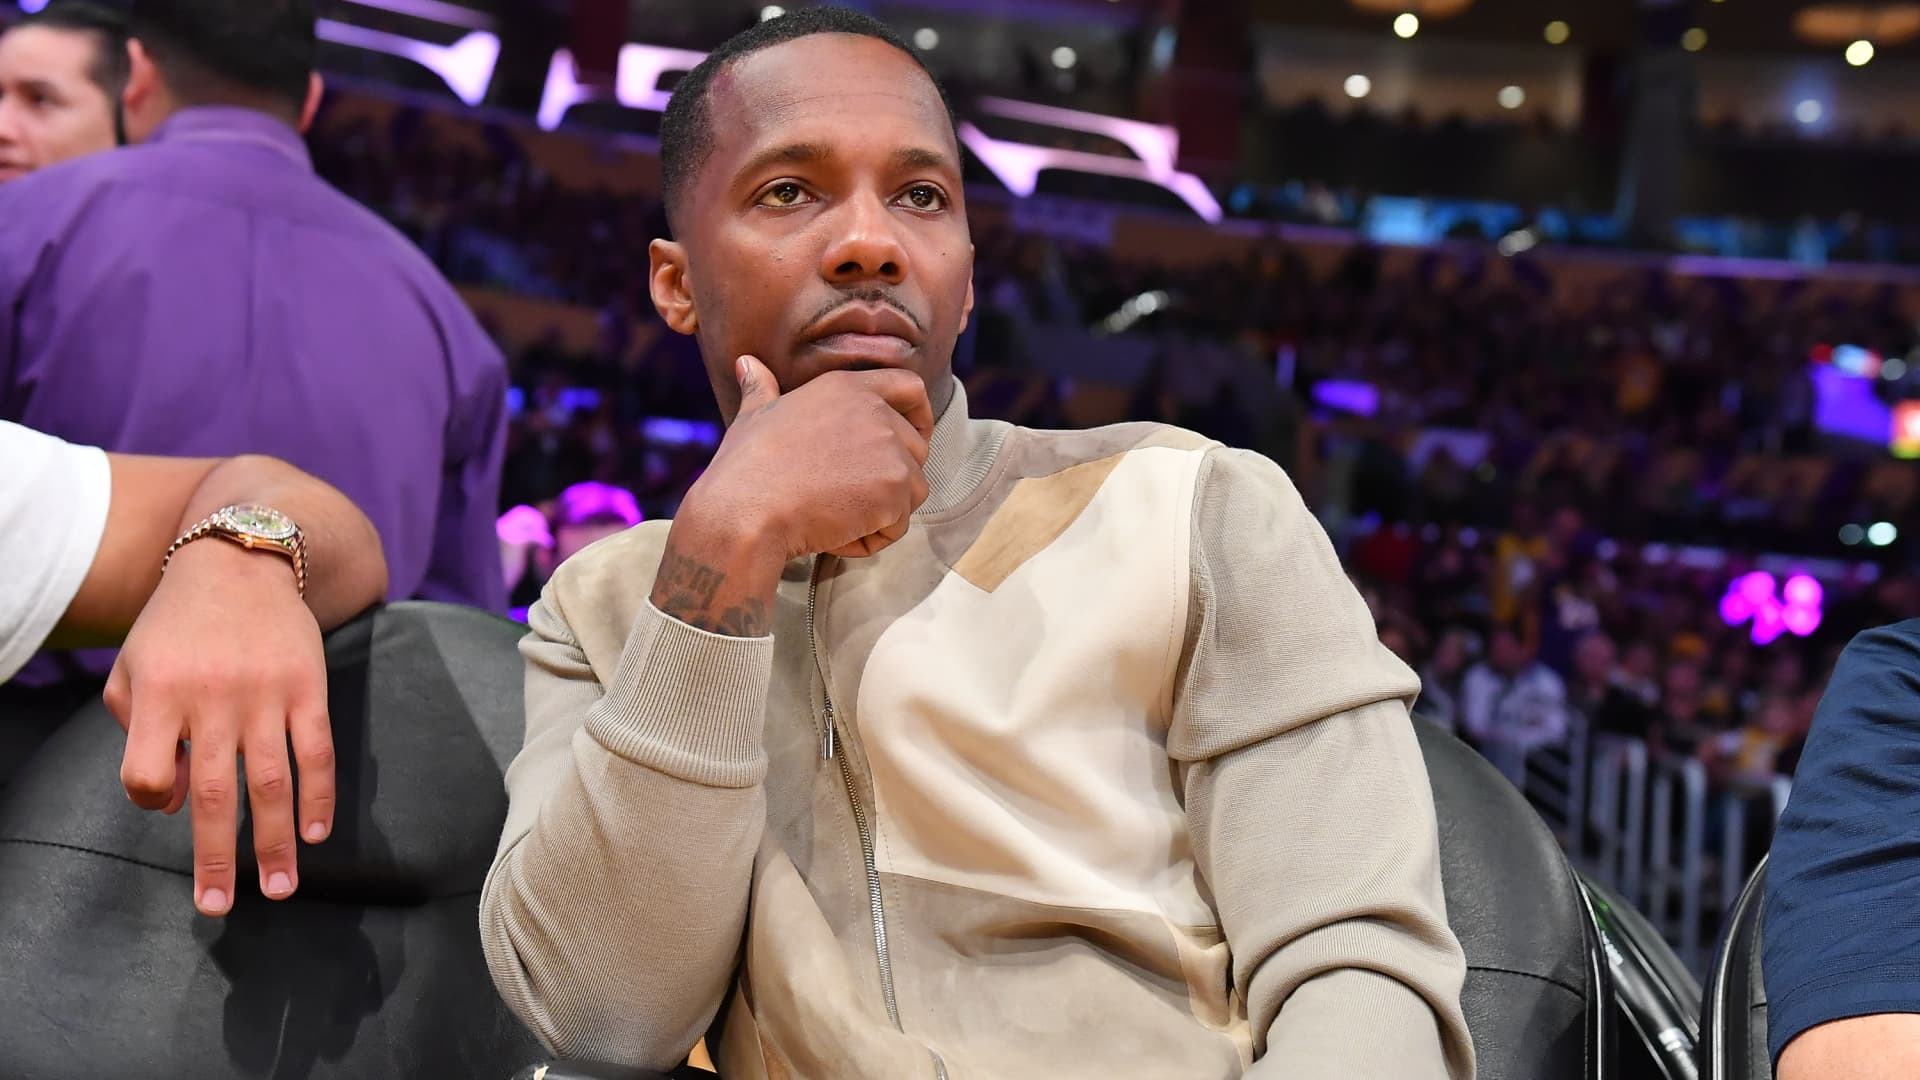 Robinhood partners with Klutch Sports, brings Rich Paul on as advisor as it moves into sports and entertainment